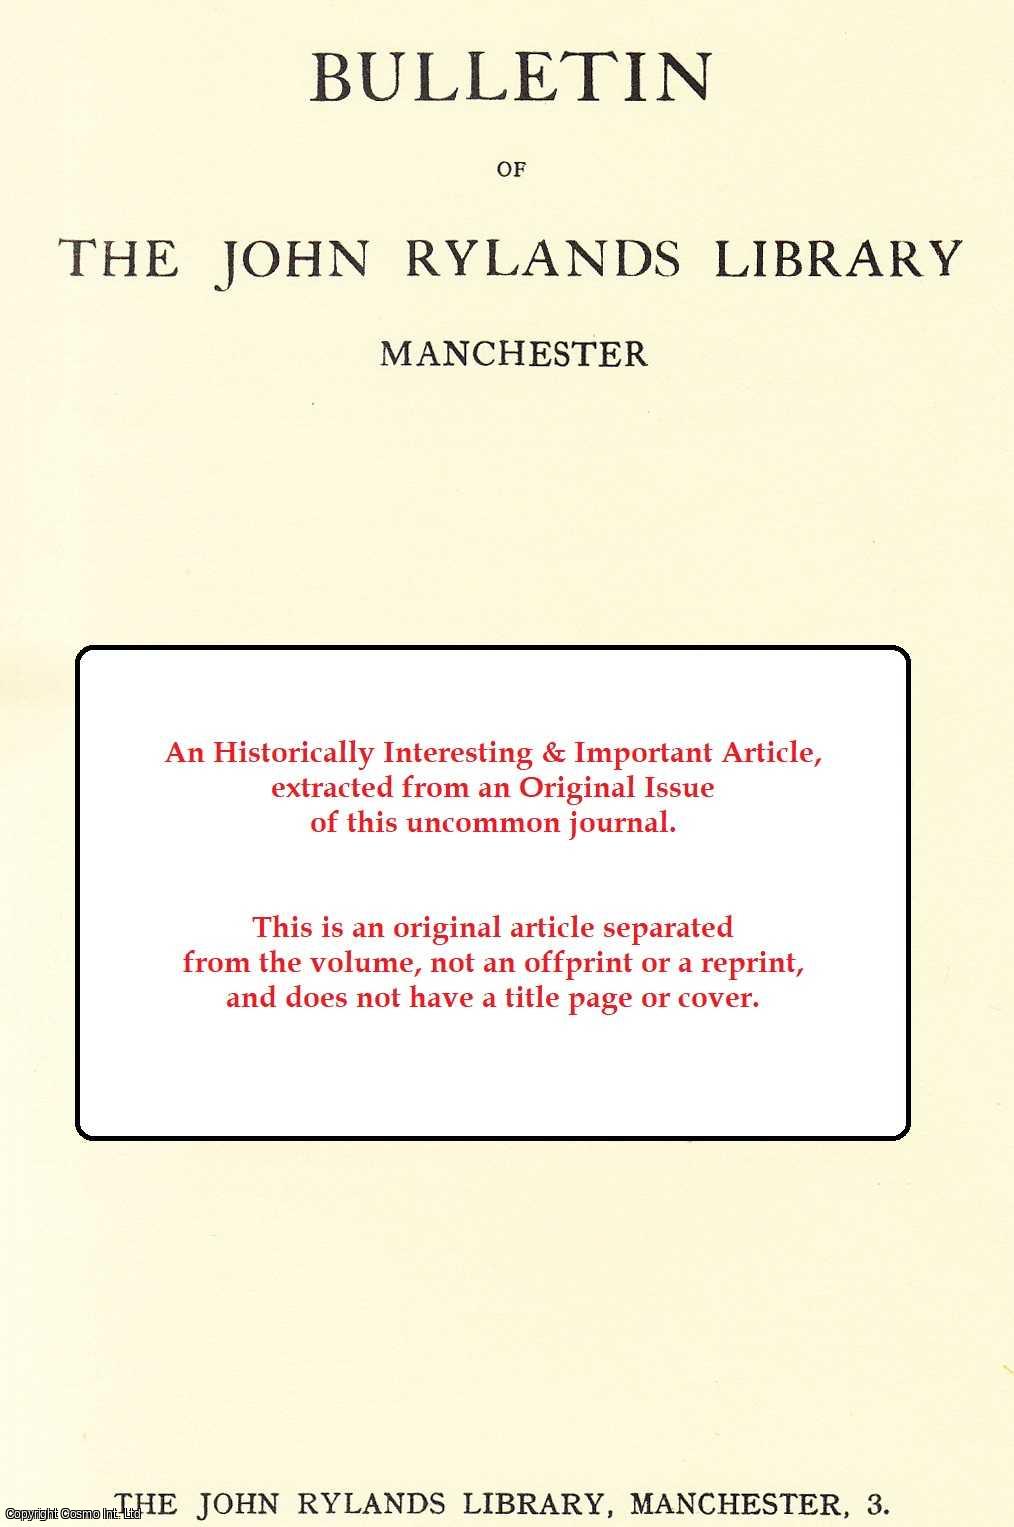 Irvin Ehrenpreis and James L. Clifford - Swiftiana in Rylands English MS. 659 and related Documents. An original article from the Bulletin of the John Rylands Library Manchester, 1955.